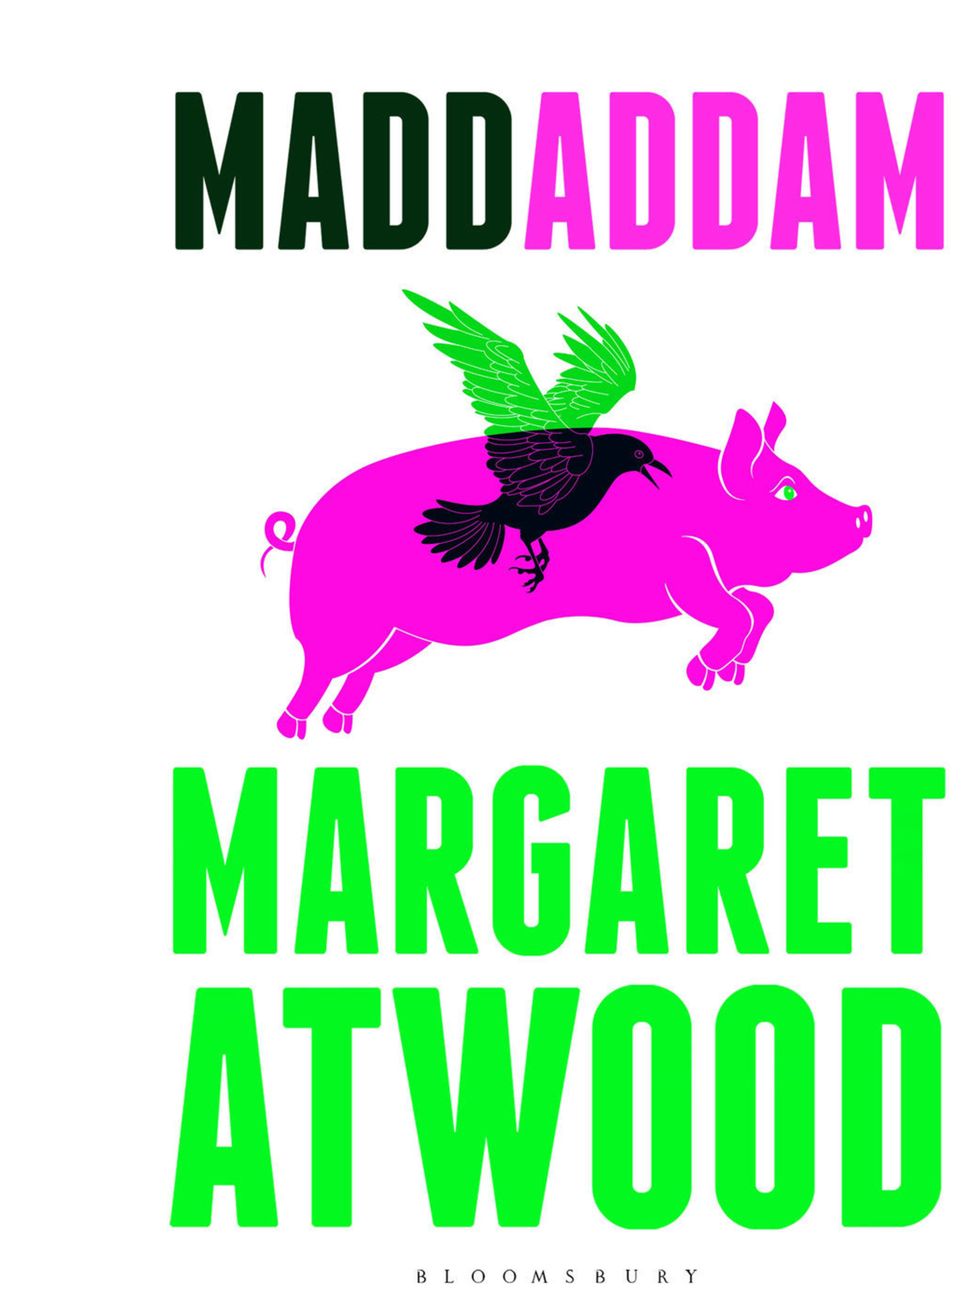 <p><strong>Margaret Atwood <em>Maddaddam</em></strong></p><p>The wait is finally over! Internationally acclaimed author of <em>The Handmaids Tale</em> Margaret Atwood releases her latest book this week. Perfect for a chilled weekend in.</p><p>Out now</p>